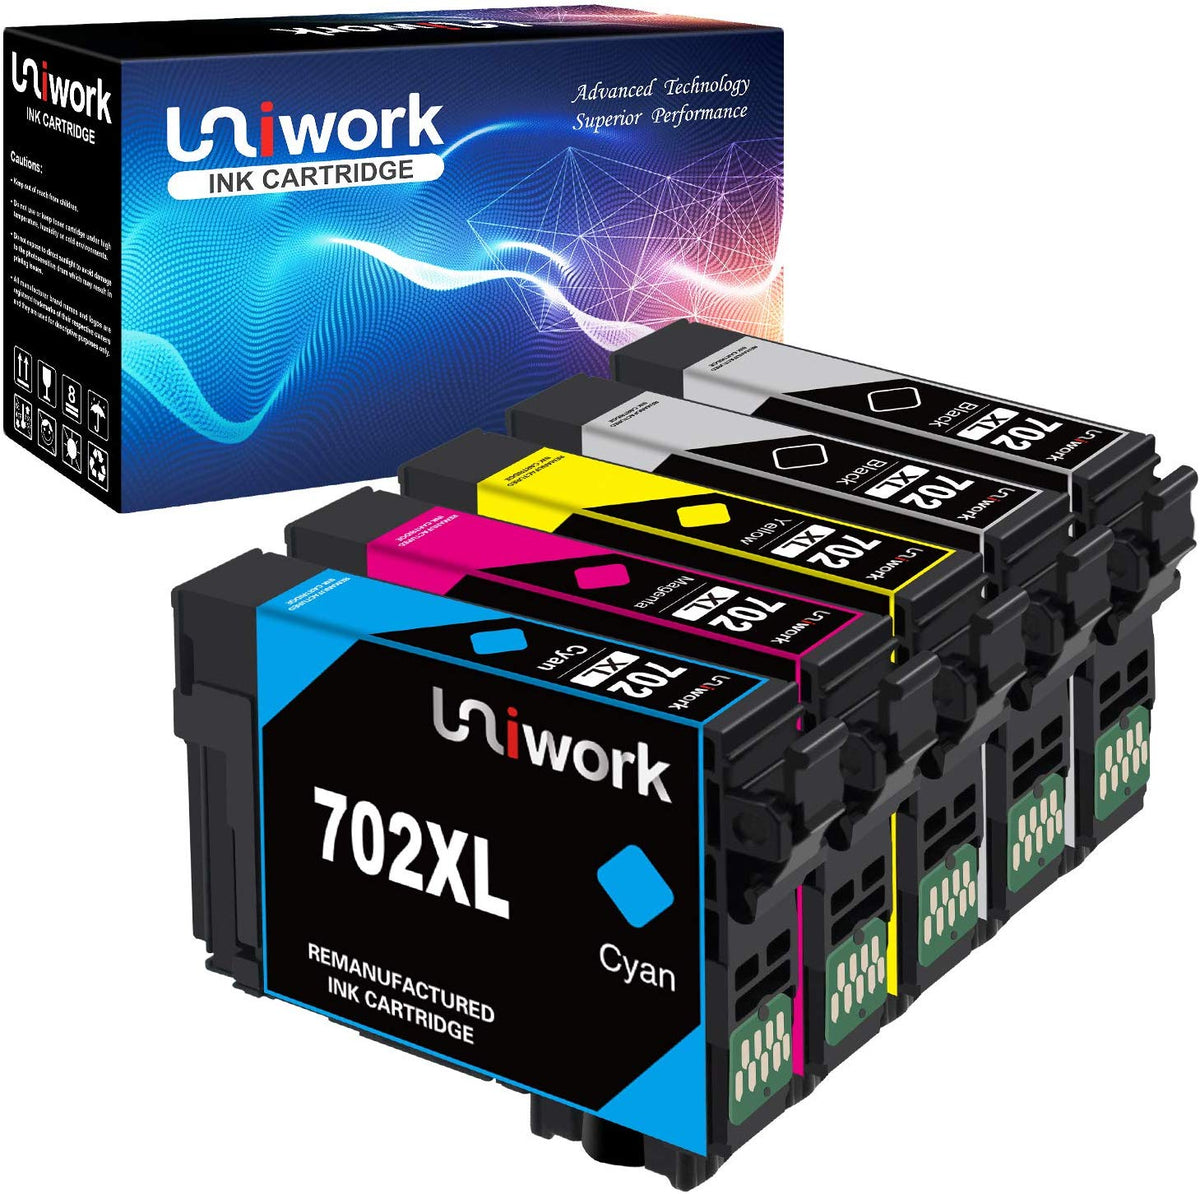 Uniwork Remanufactured Ink Cartridges Replacement For Epson 702 702xl 4337